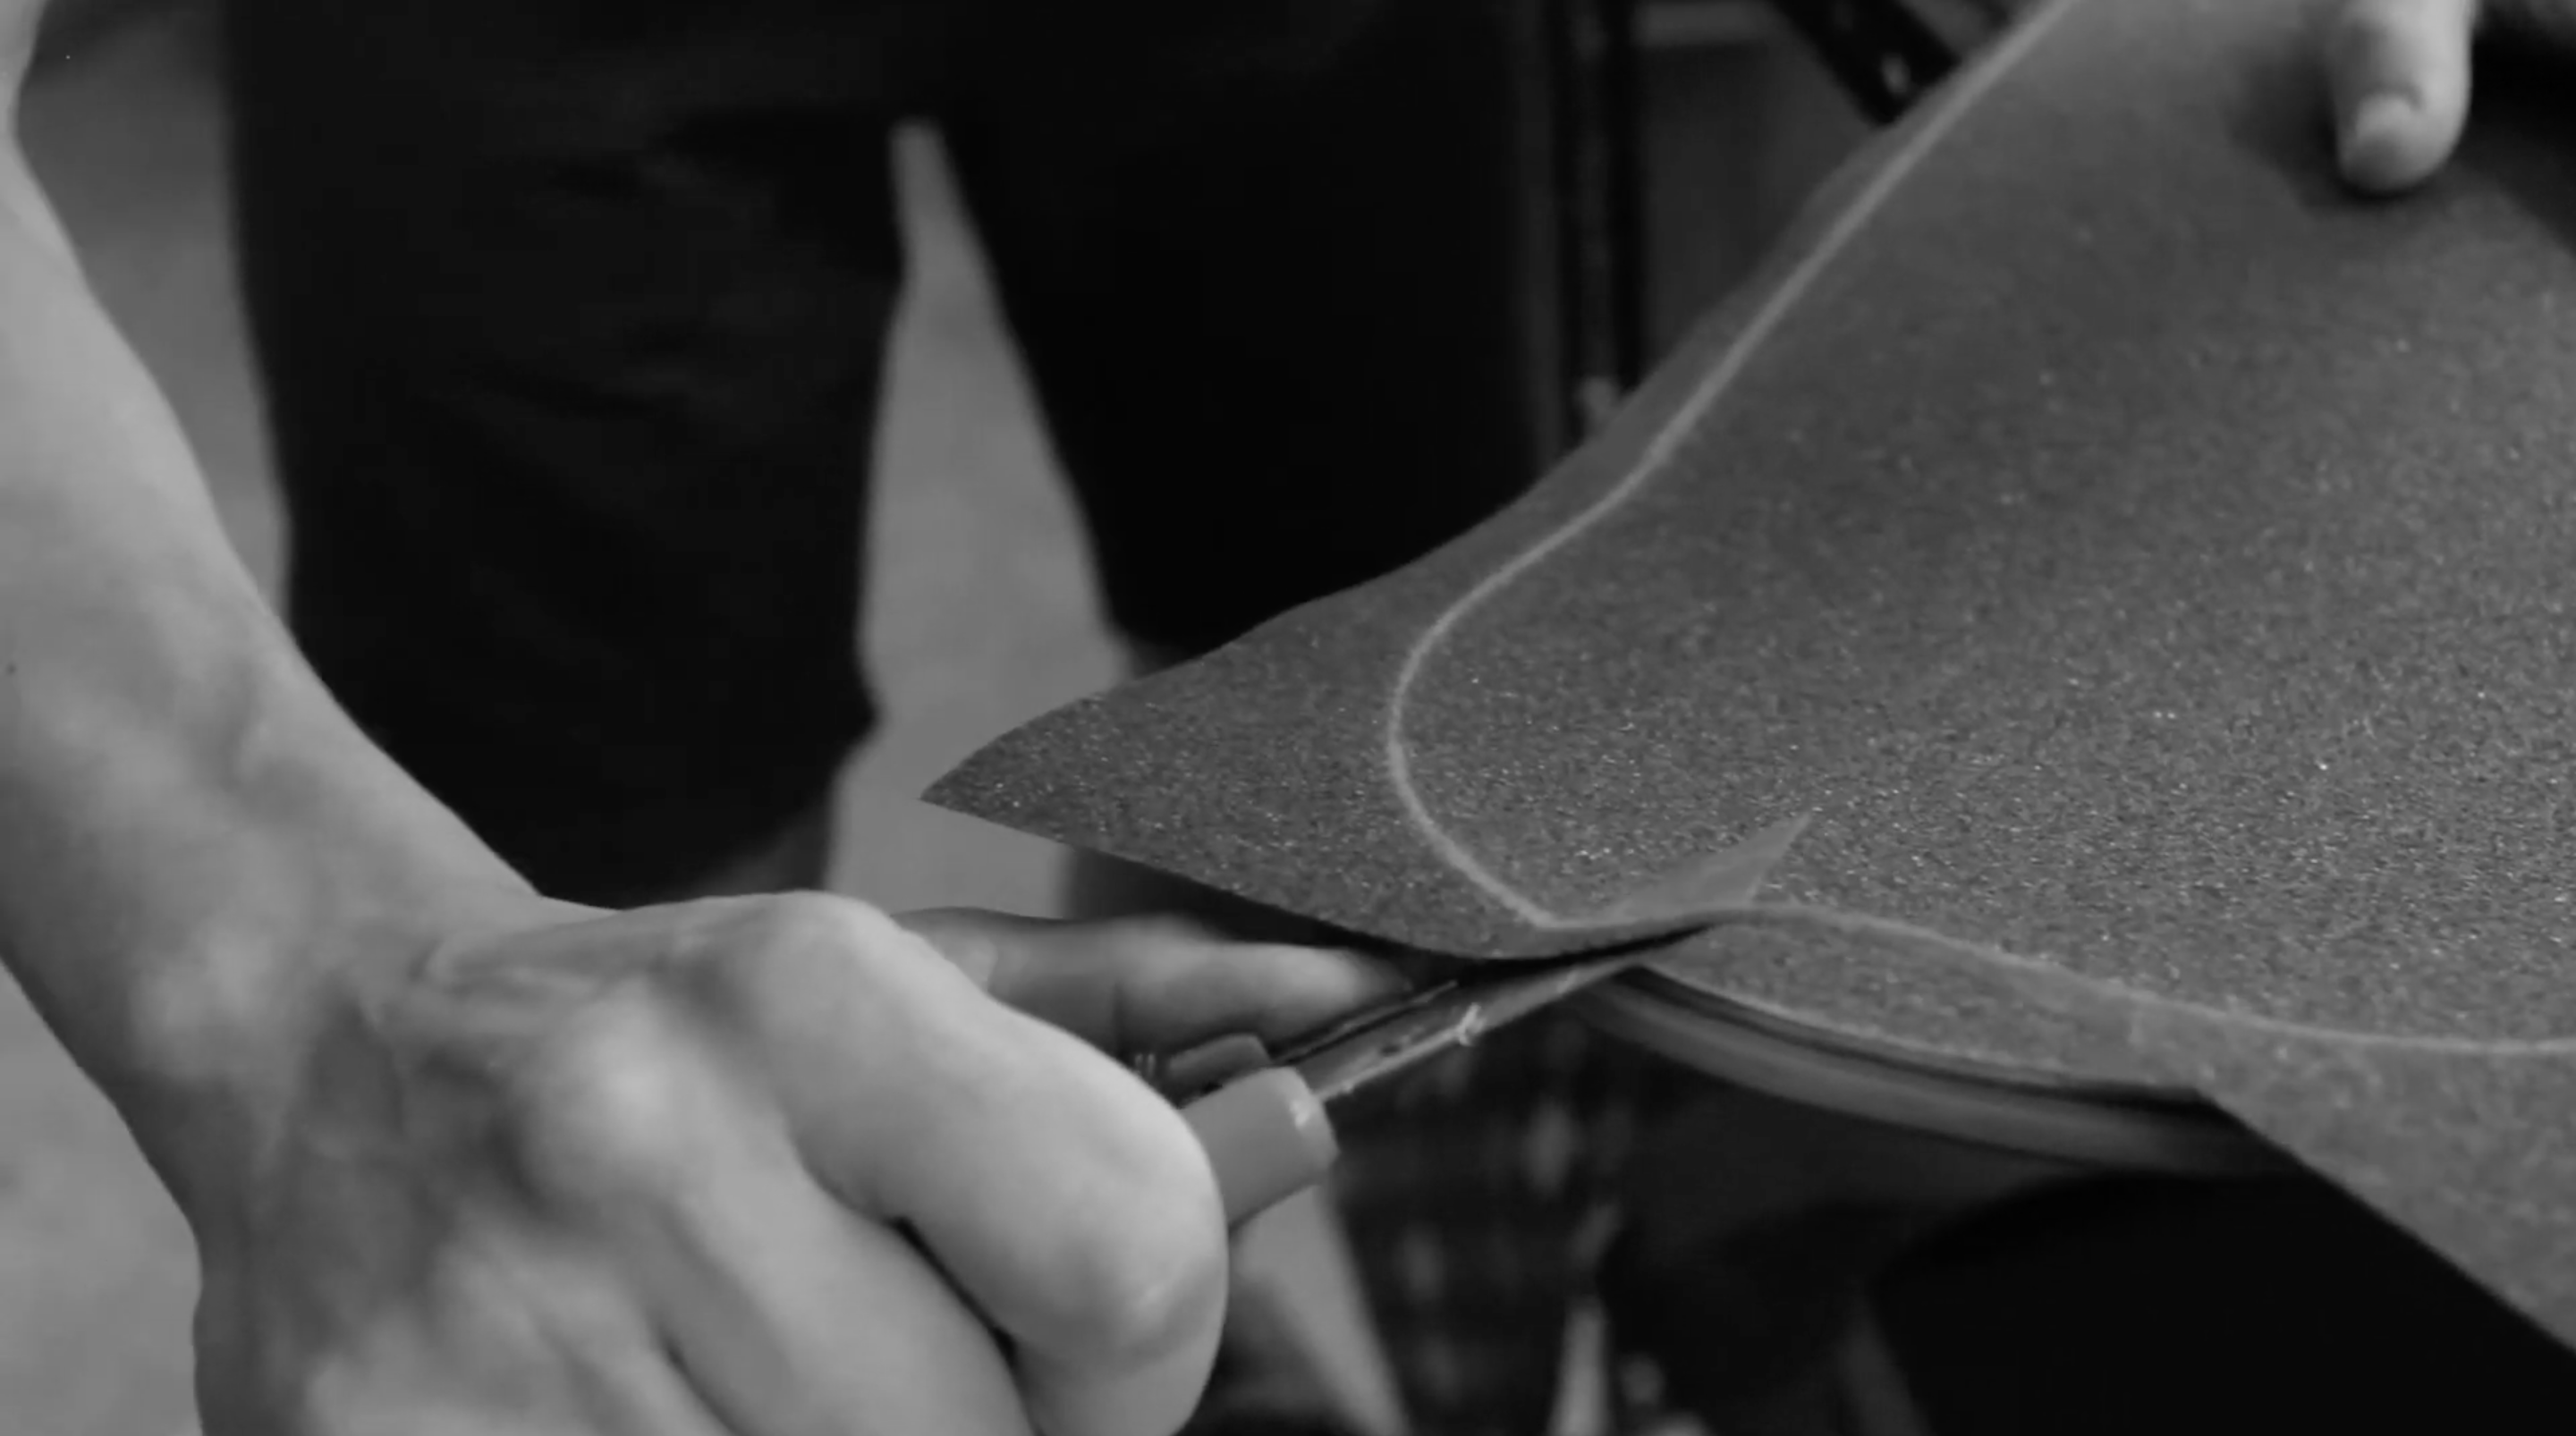 Using a sharp blade, cut the excess griptape from below, pulling the blade towards you and running against the deck edge